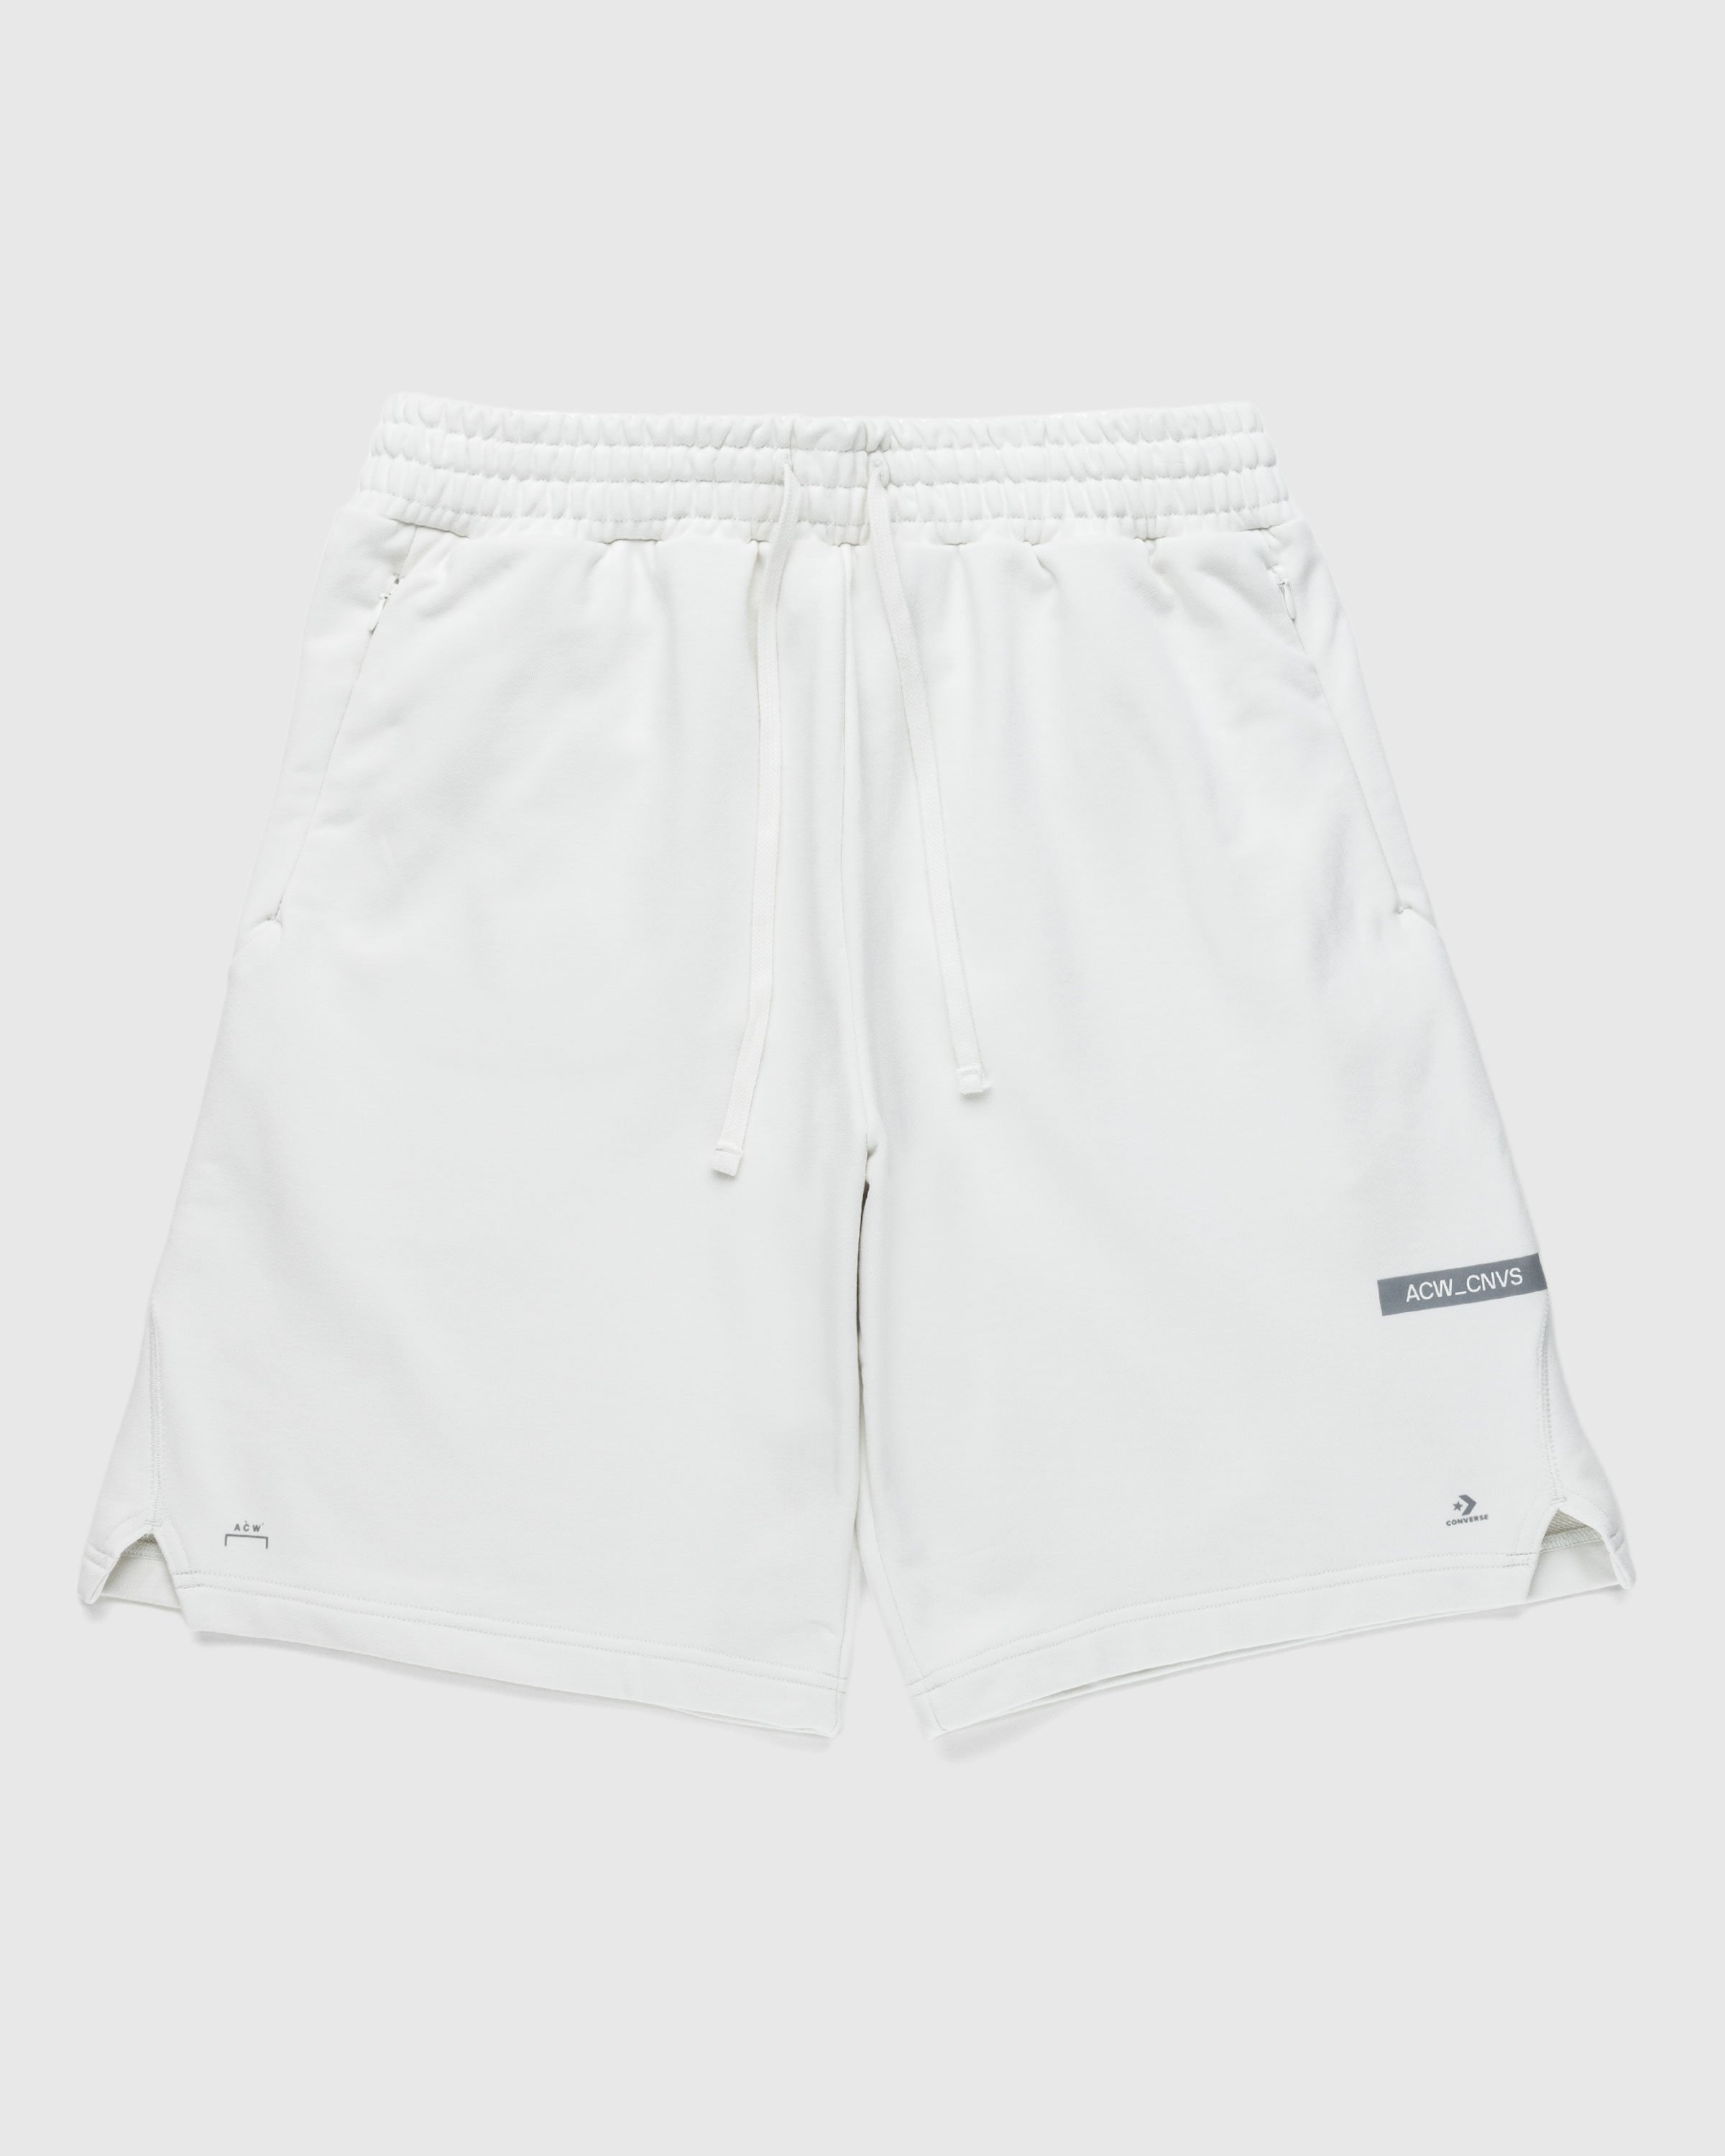 Converse x A-Cold-Wall* – Reflective Shorts Stone - Shorts - Beige - Image 1